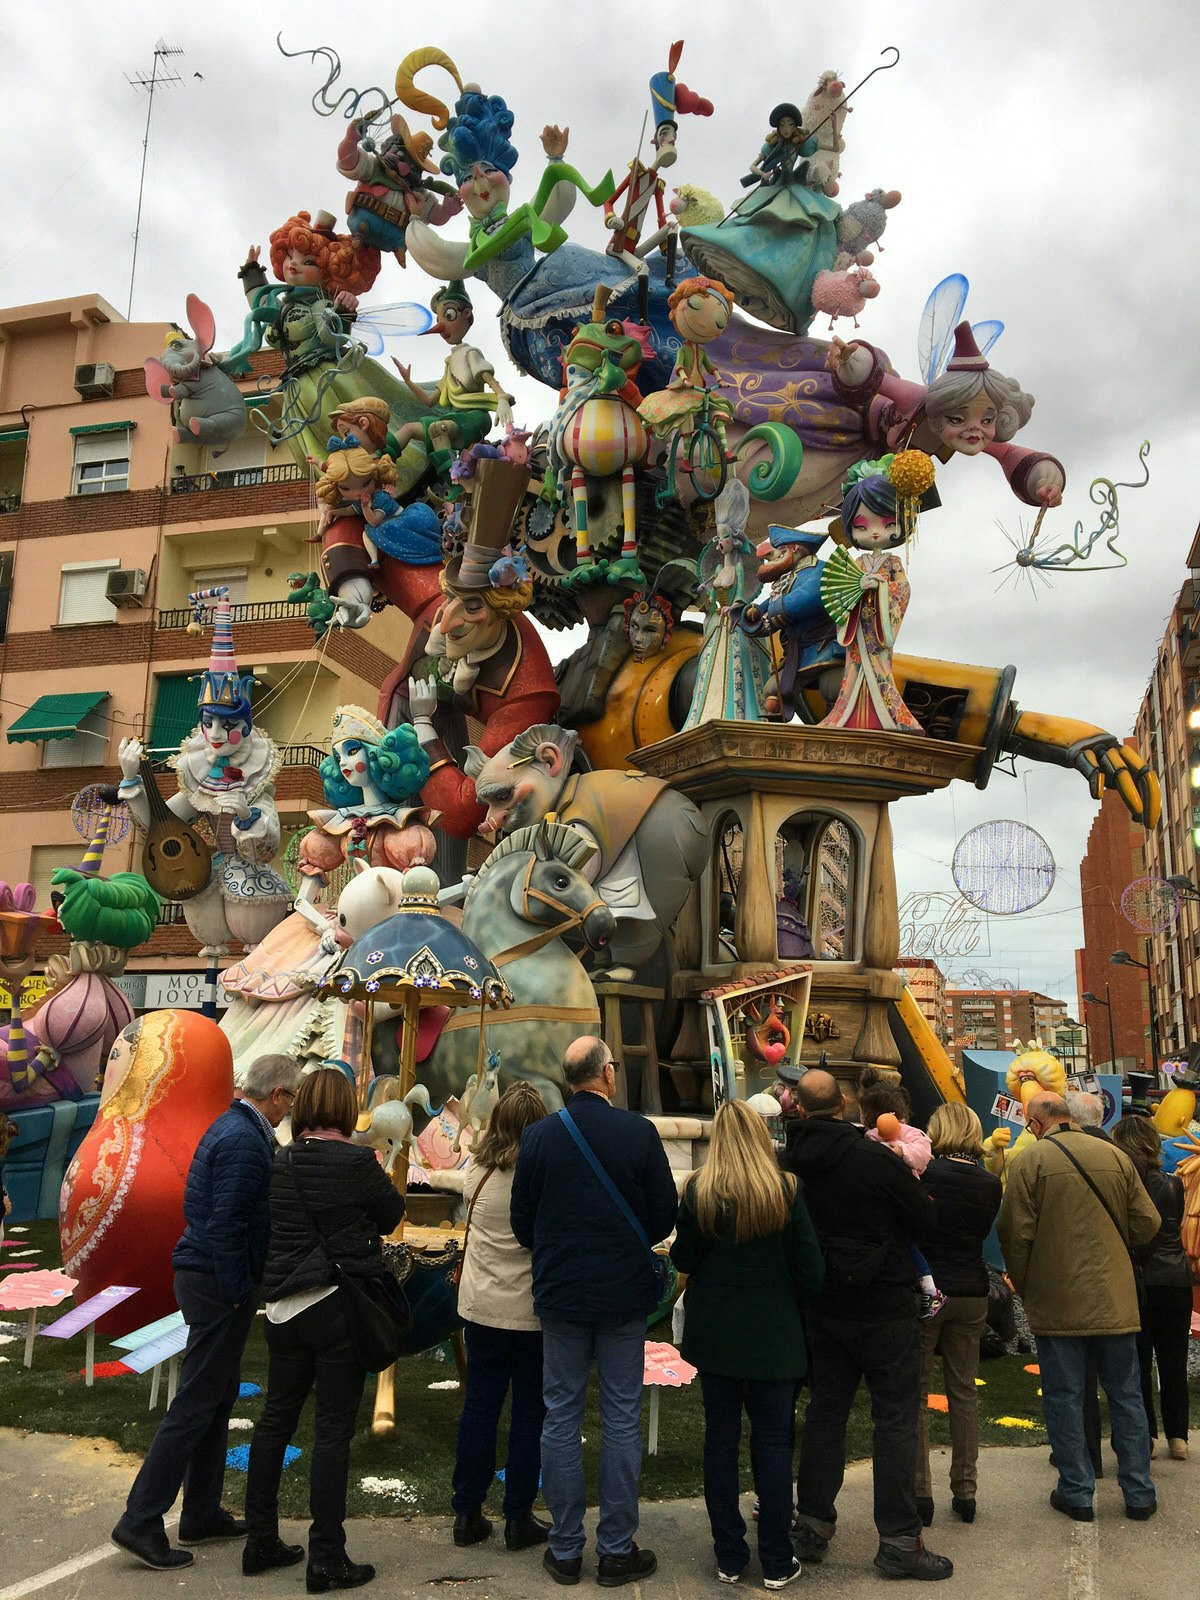 A group of people surrounding a tall falla monument and looking at the many colourful figures with a fairytale theme